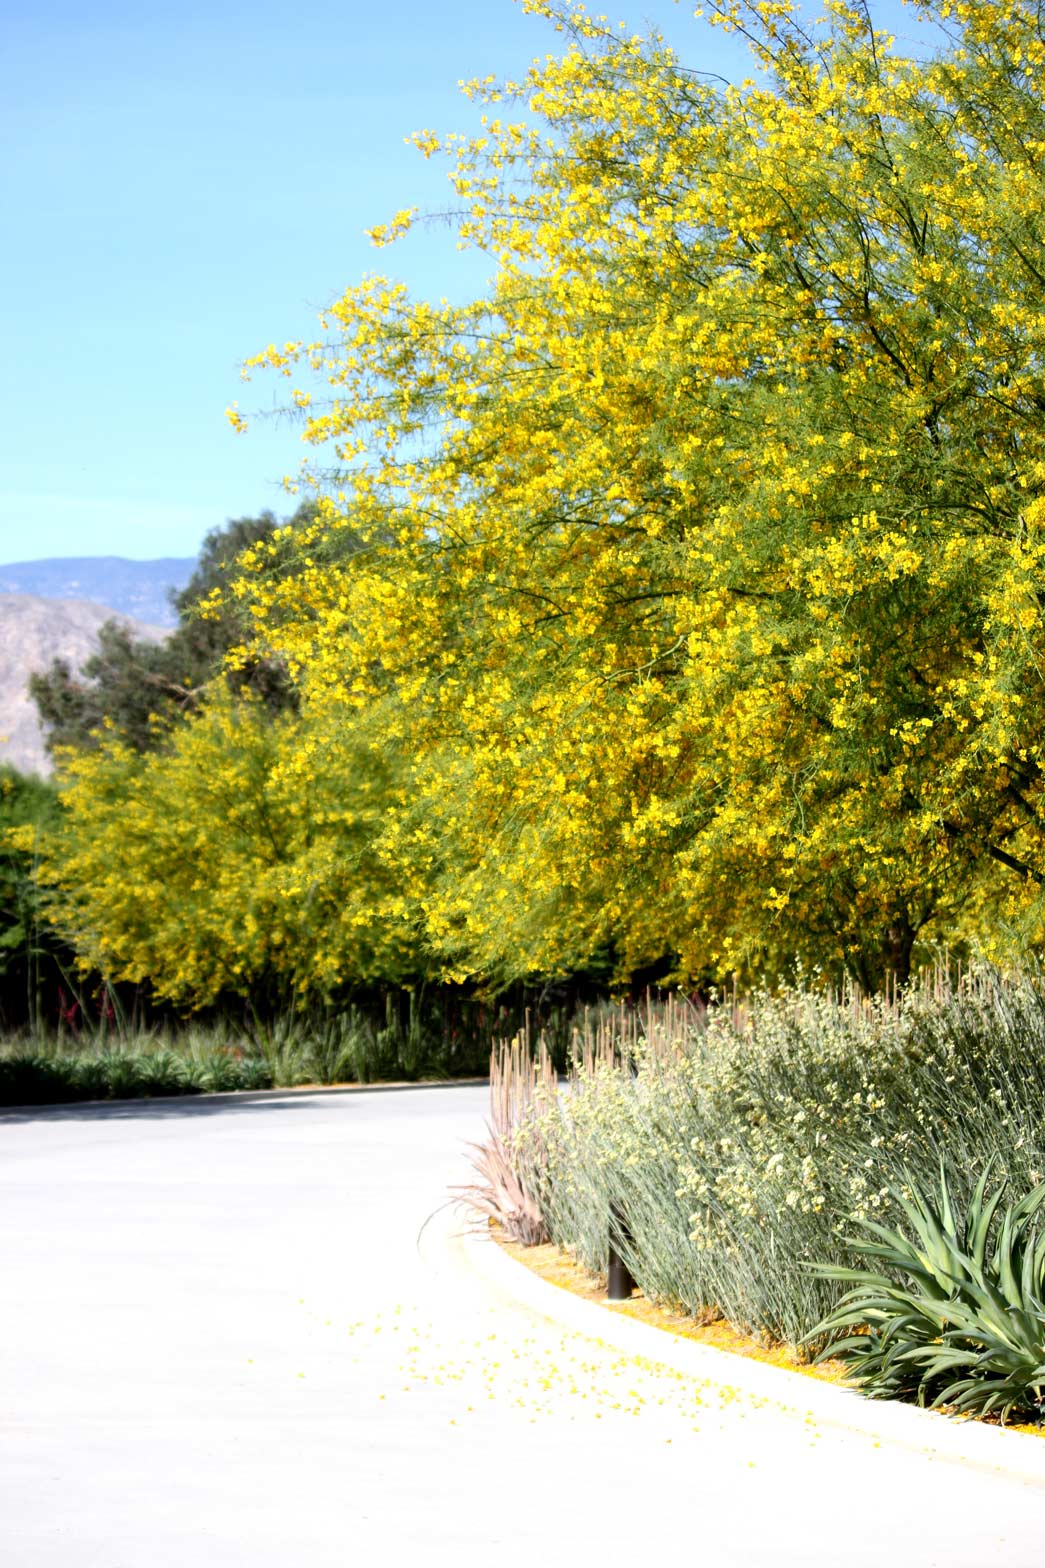 The driveway into the Sunnylands Center and Gardens lined with blooming Palo Verde trees.